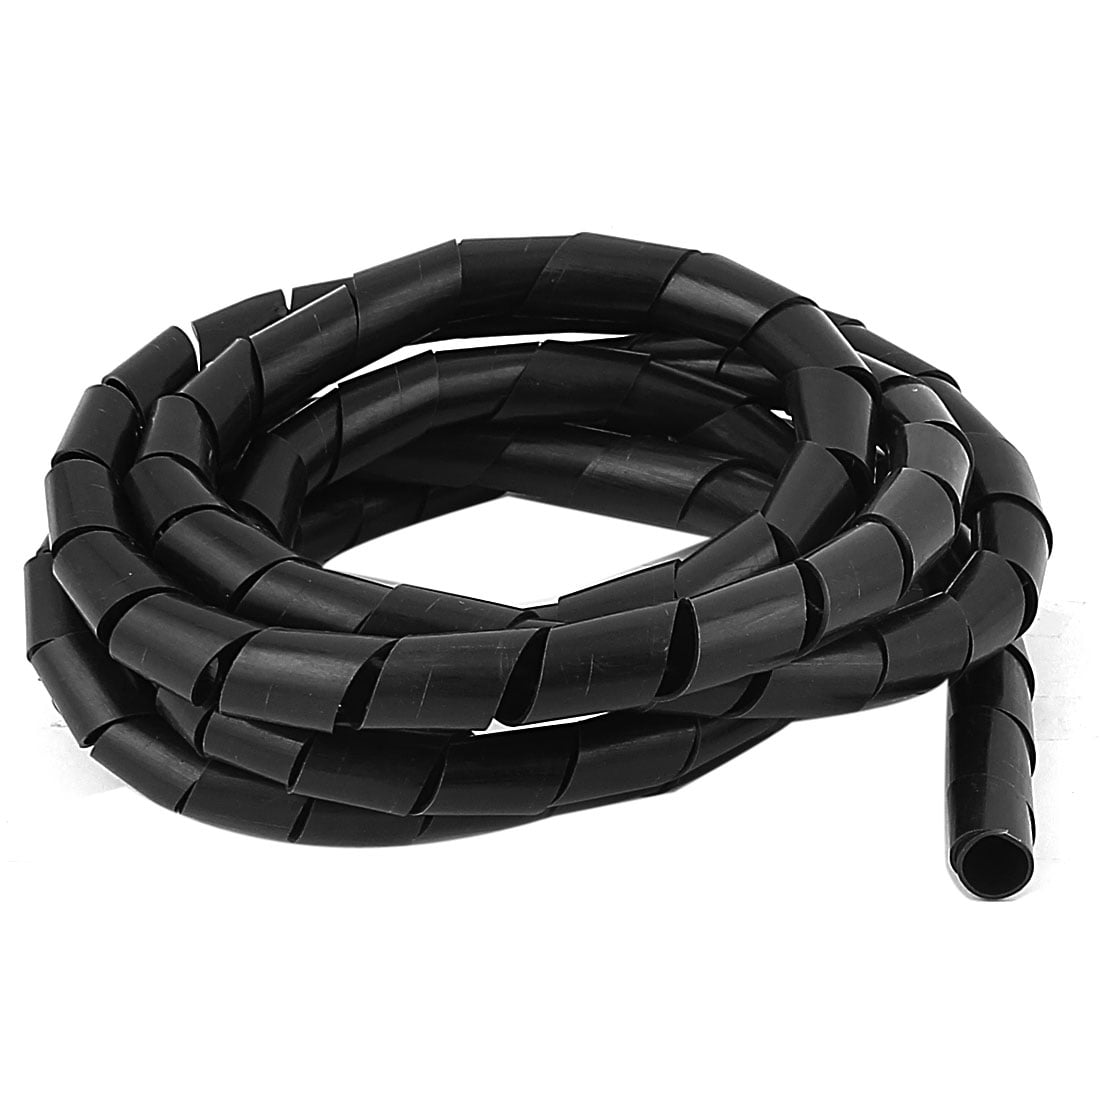 Black Commercial Cable Tidy Spiral Wrap 2.5 m